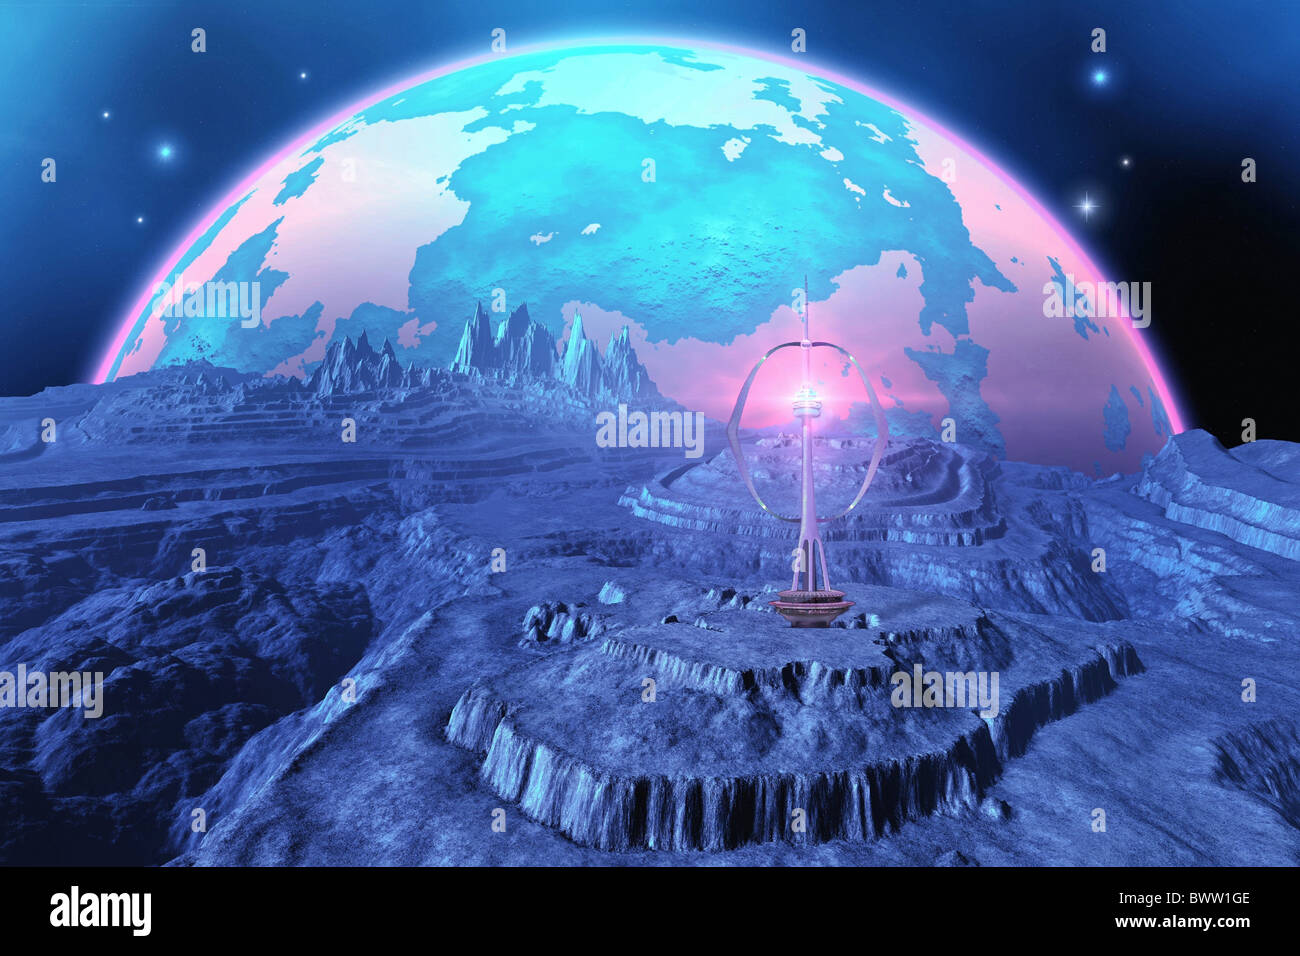 Elterra - Futuristic life on a moon near a large nearby planet. Stock Photo